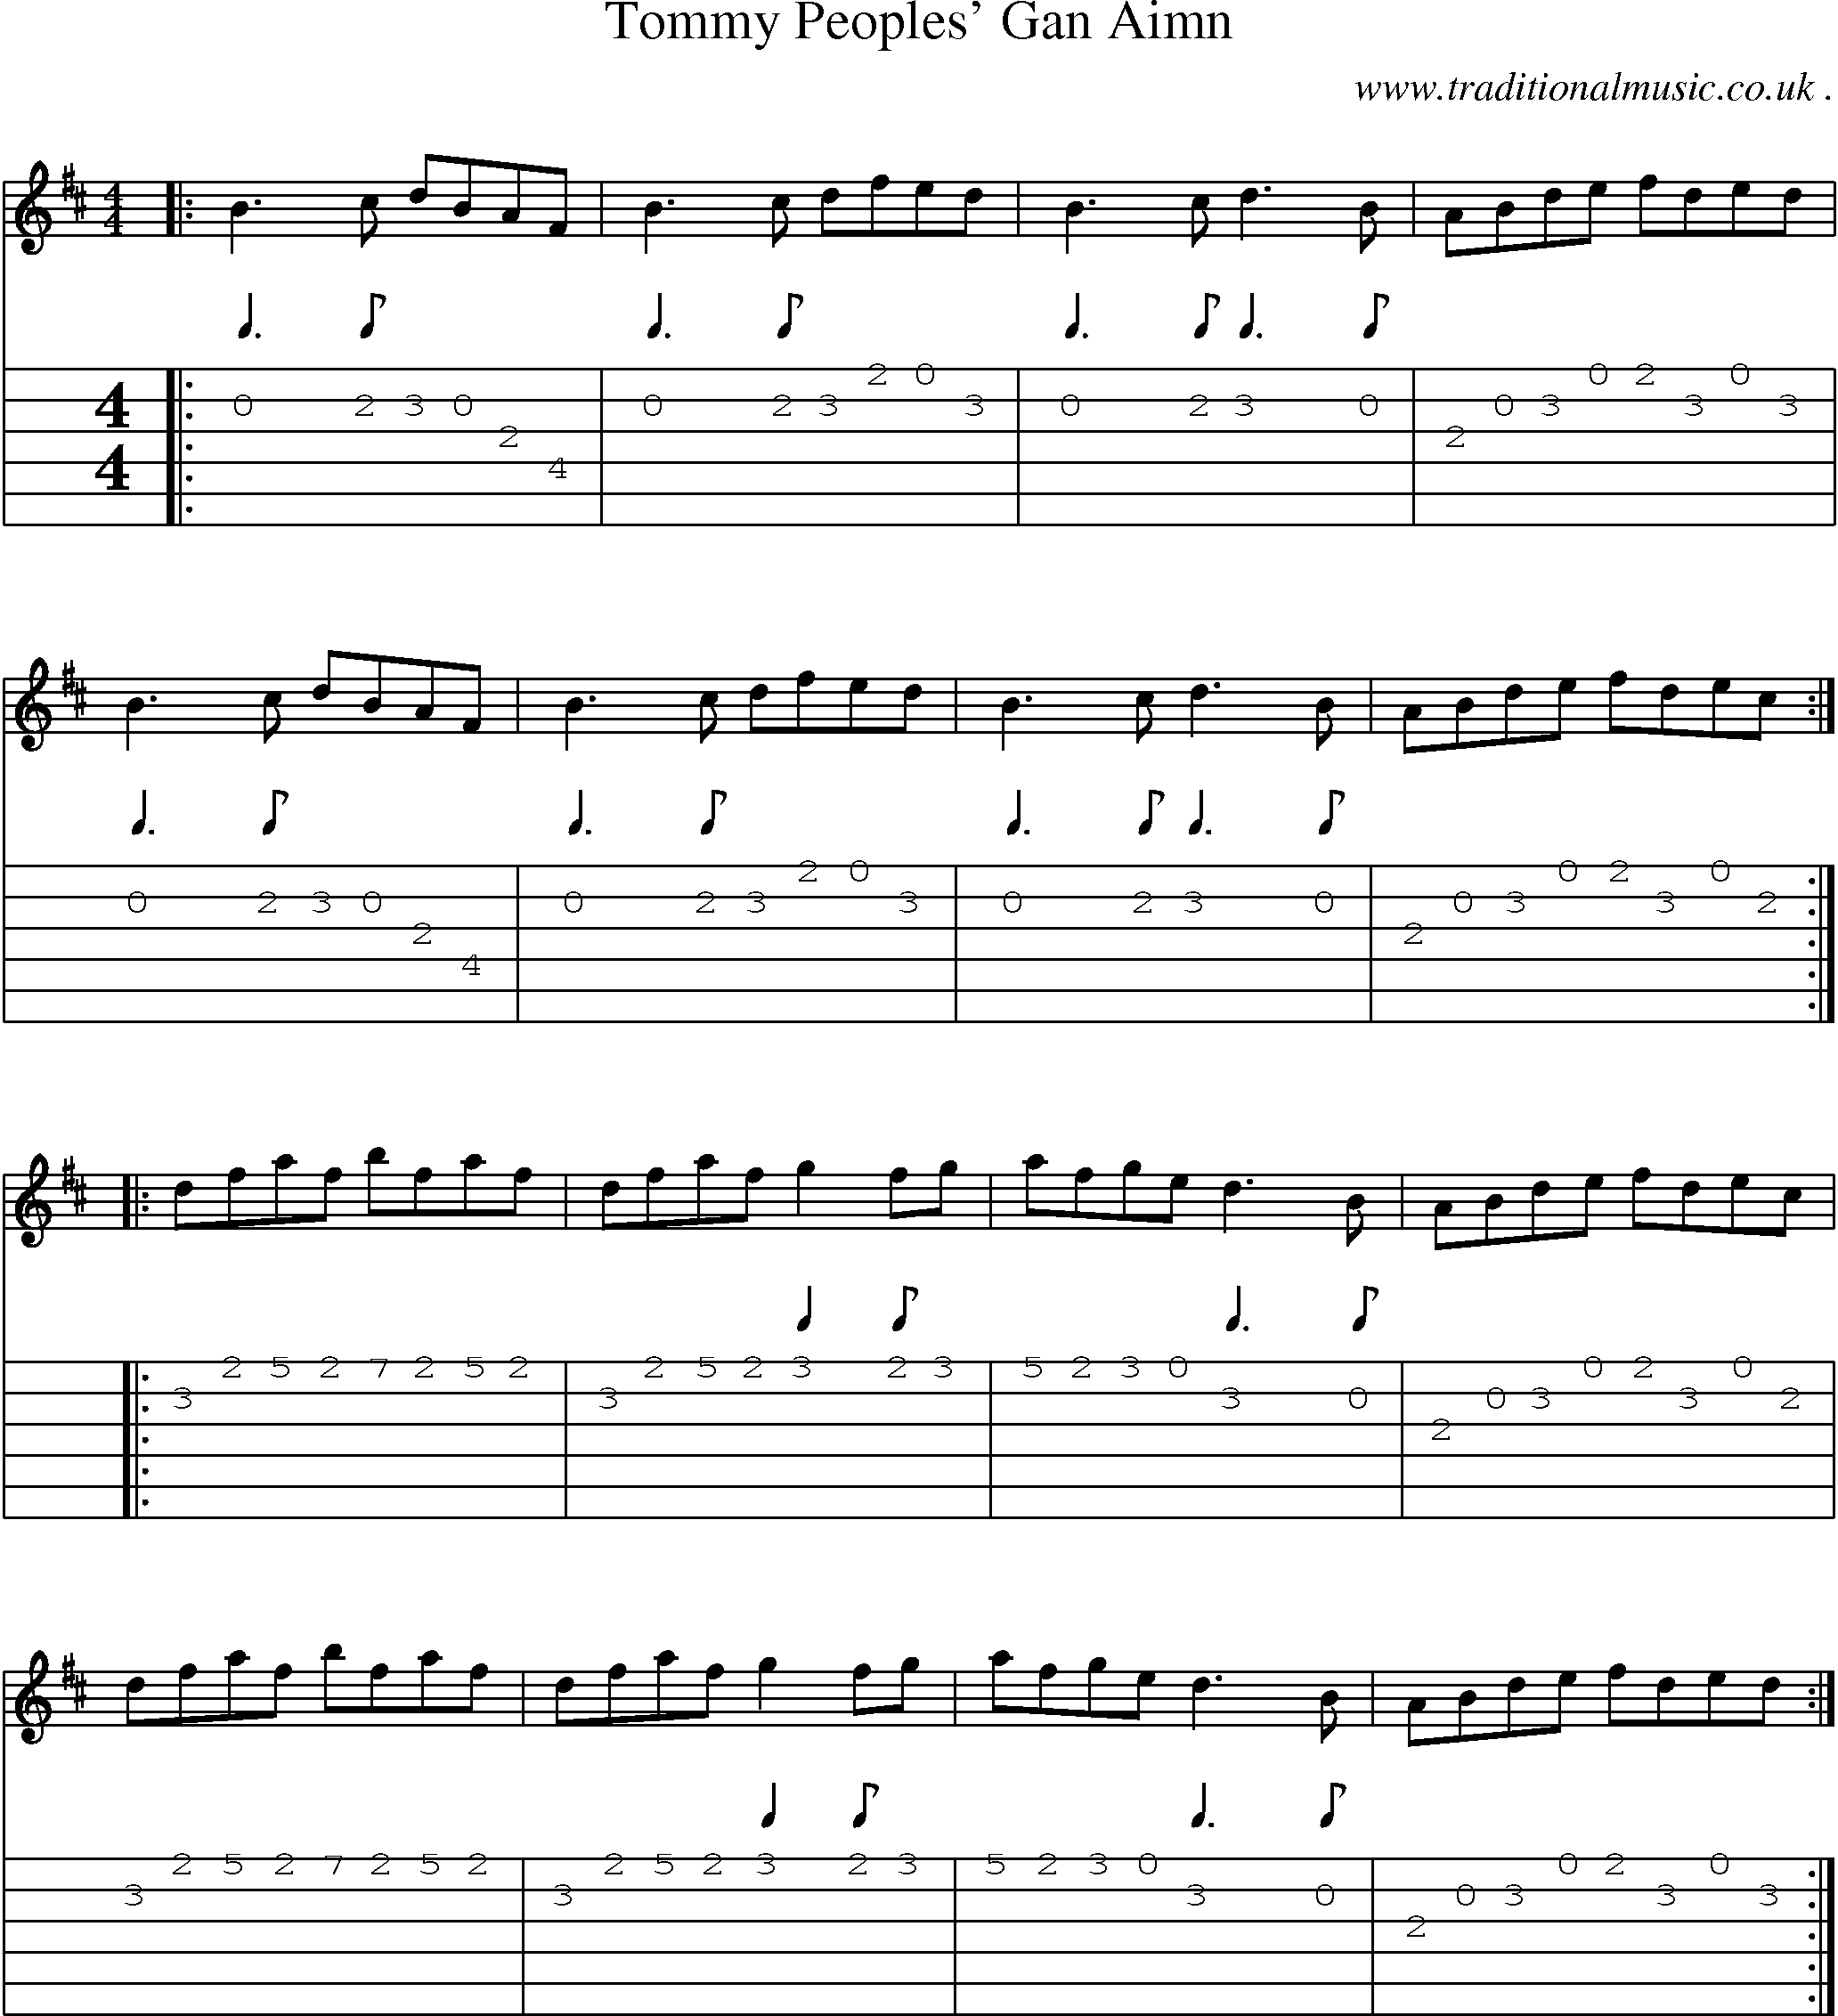 Sheet-Music and Guitar Tabs for Tommy Peoples Gan Aimn